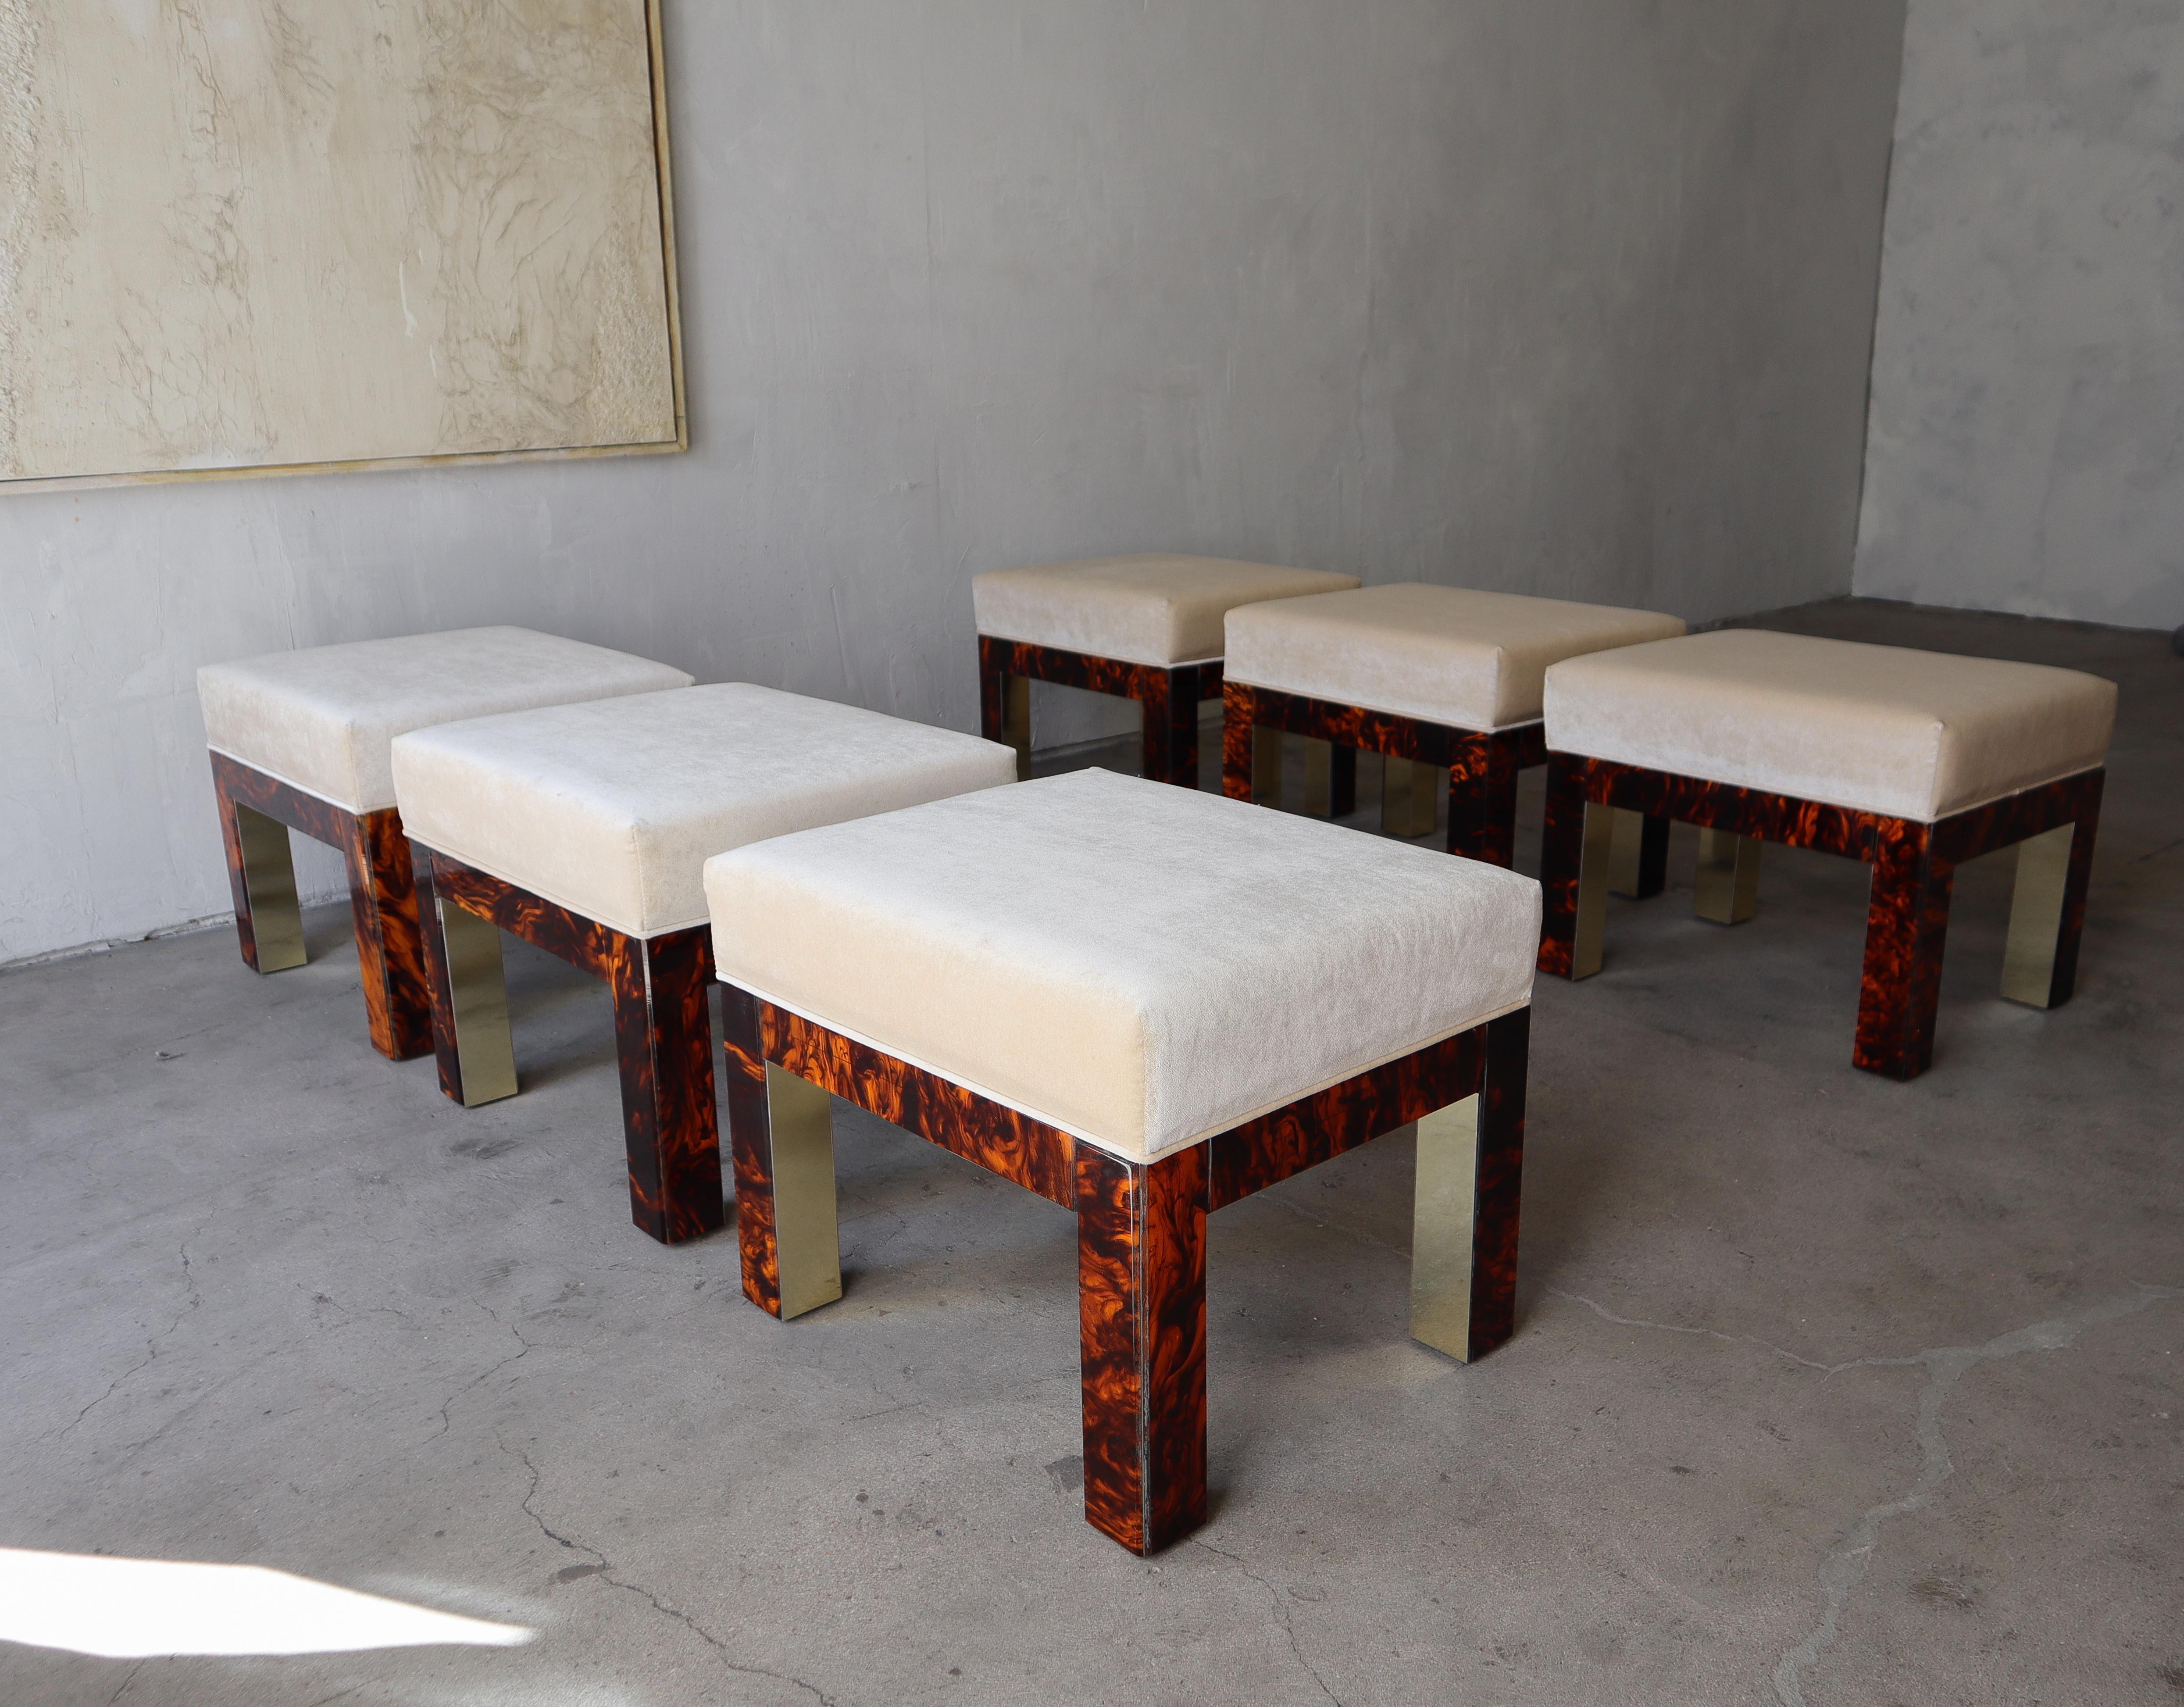 Rare and unique set of 6, 1970's low stools that can alternately be used as ottomans.  Constructed of tortoise shell Bakelite and solid brass with all new cream velvet seats.  This set is the epitome of designer and class.  They have a true upper